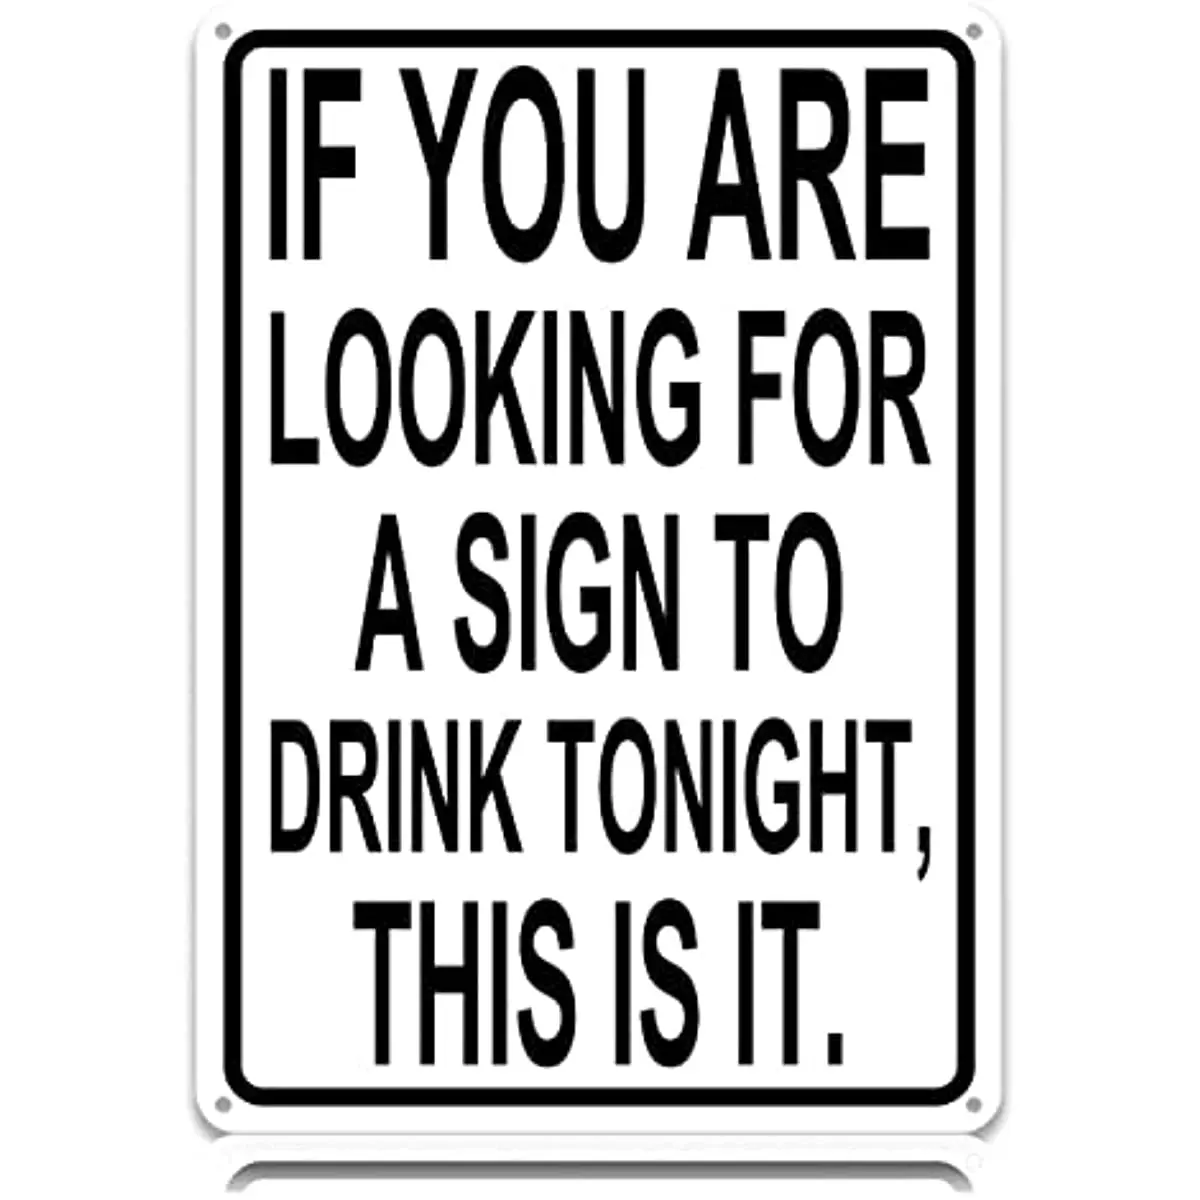 

If You're Looking for a Sign to Drink Tonight This is it Metal Funny Vintage Tin Sign Wall Art Decor Iron Poster Home